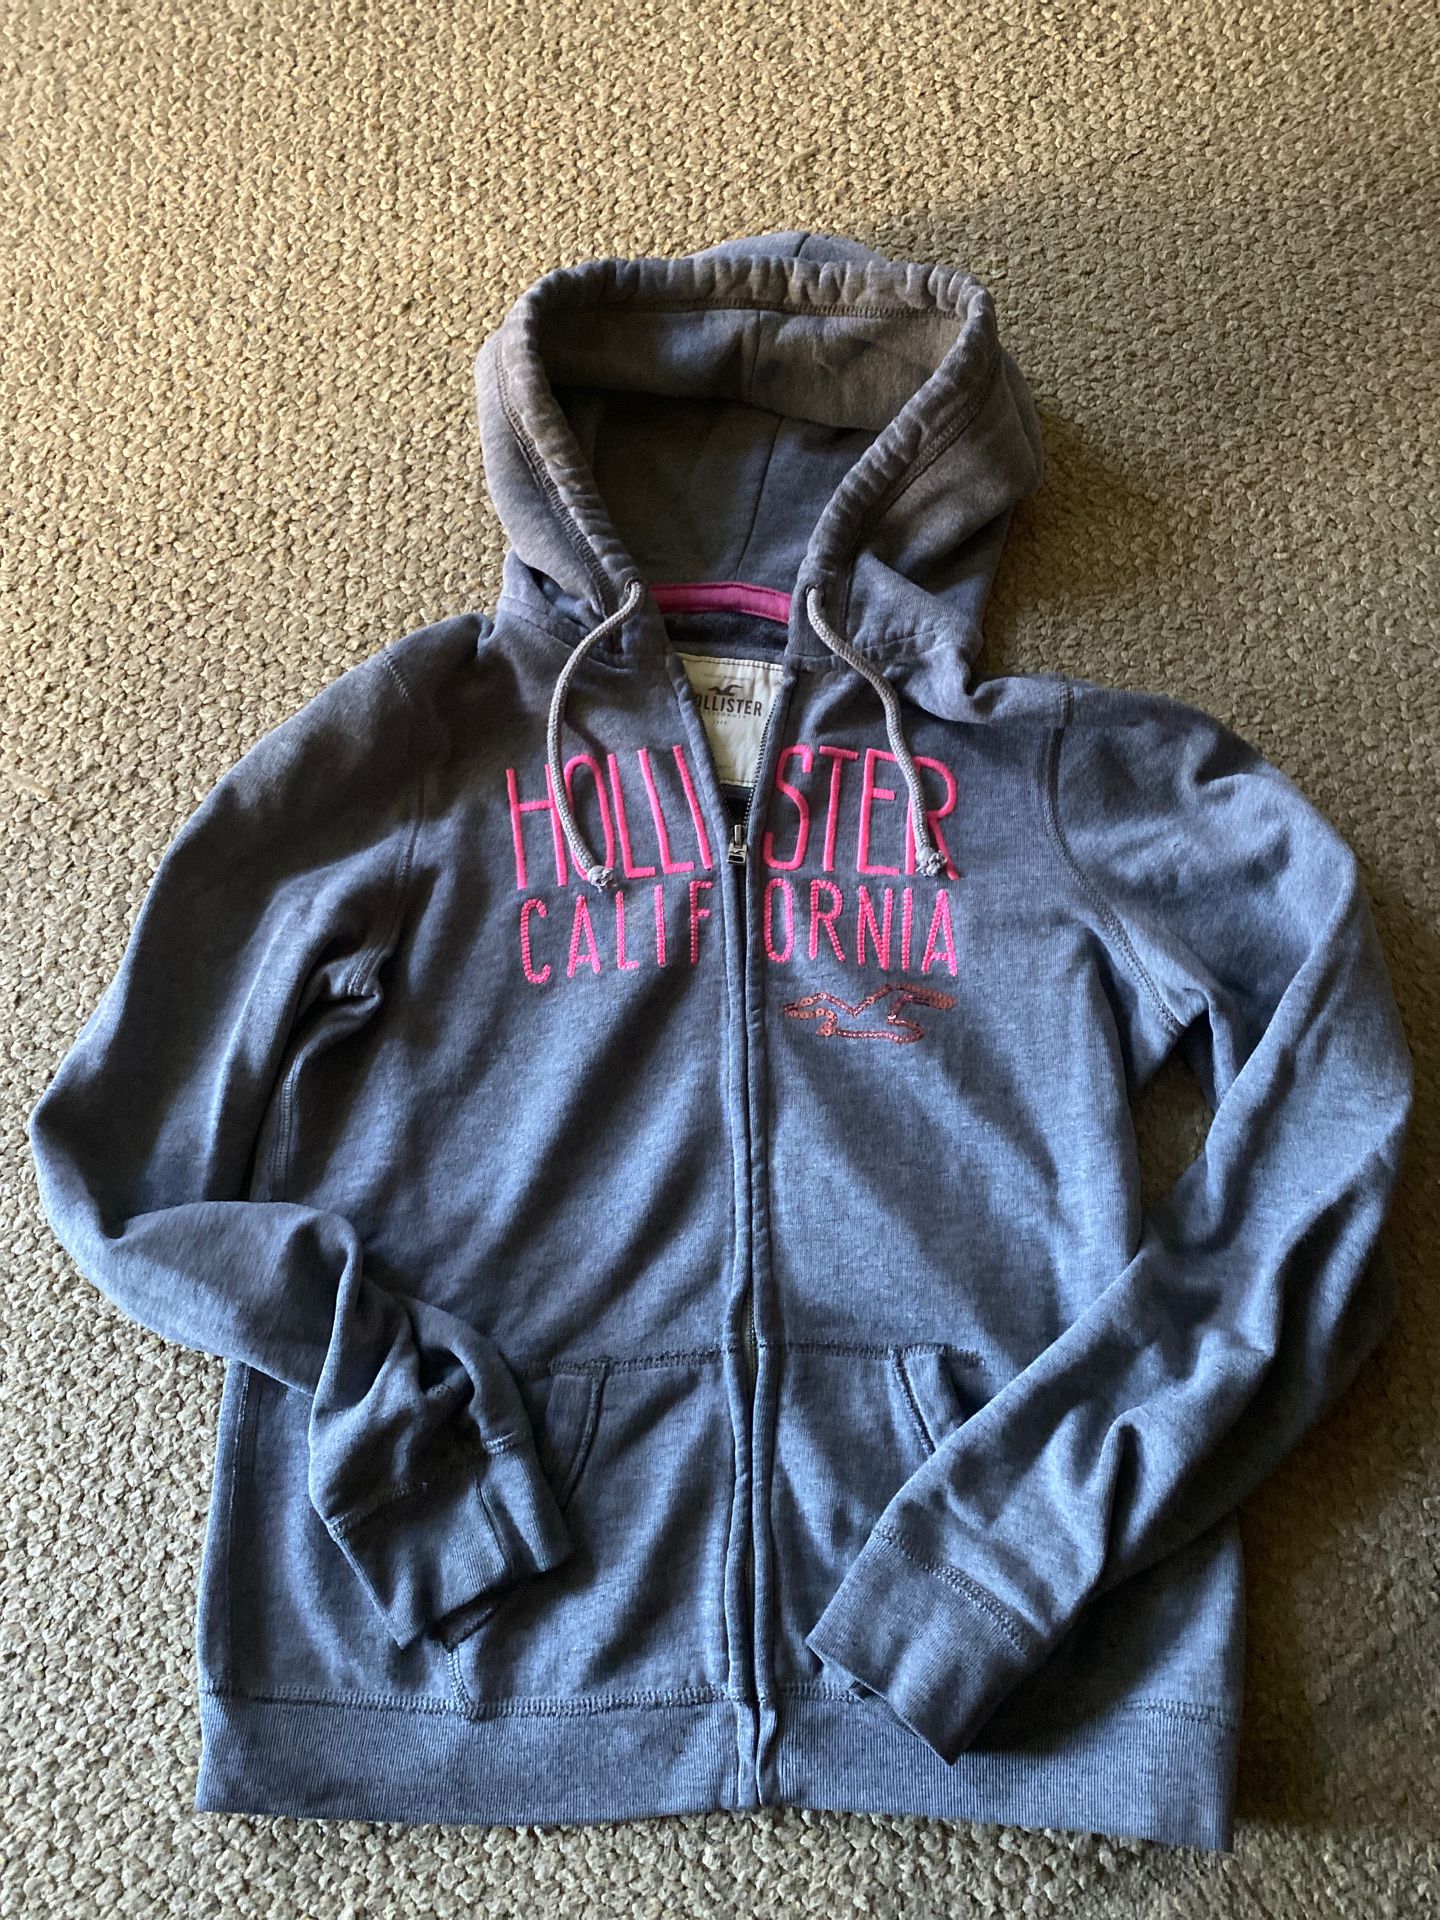 Hollister Hoodie size:L